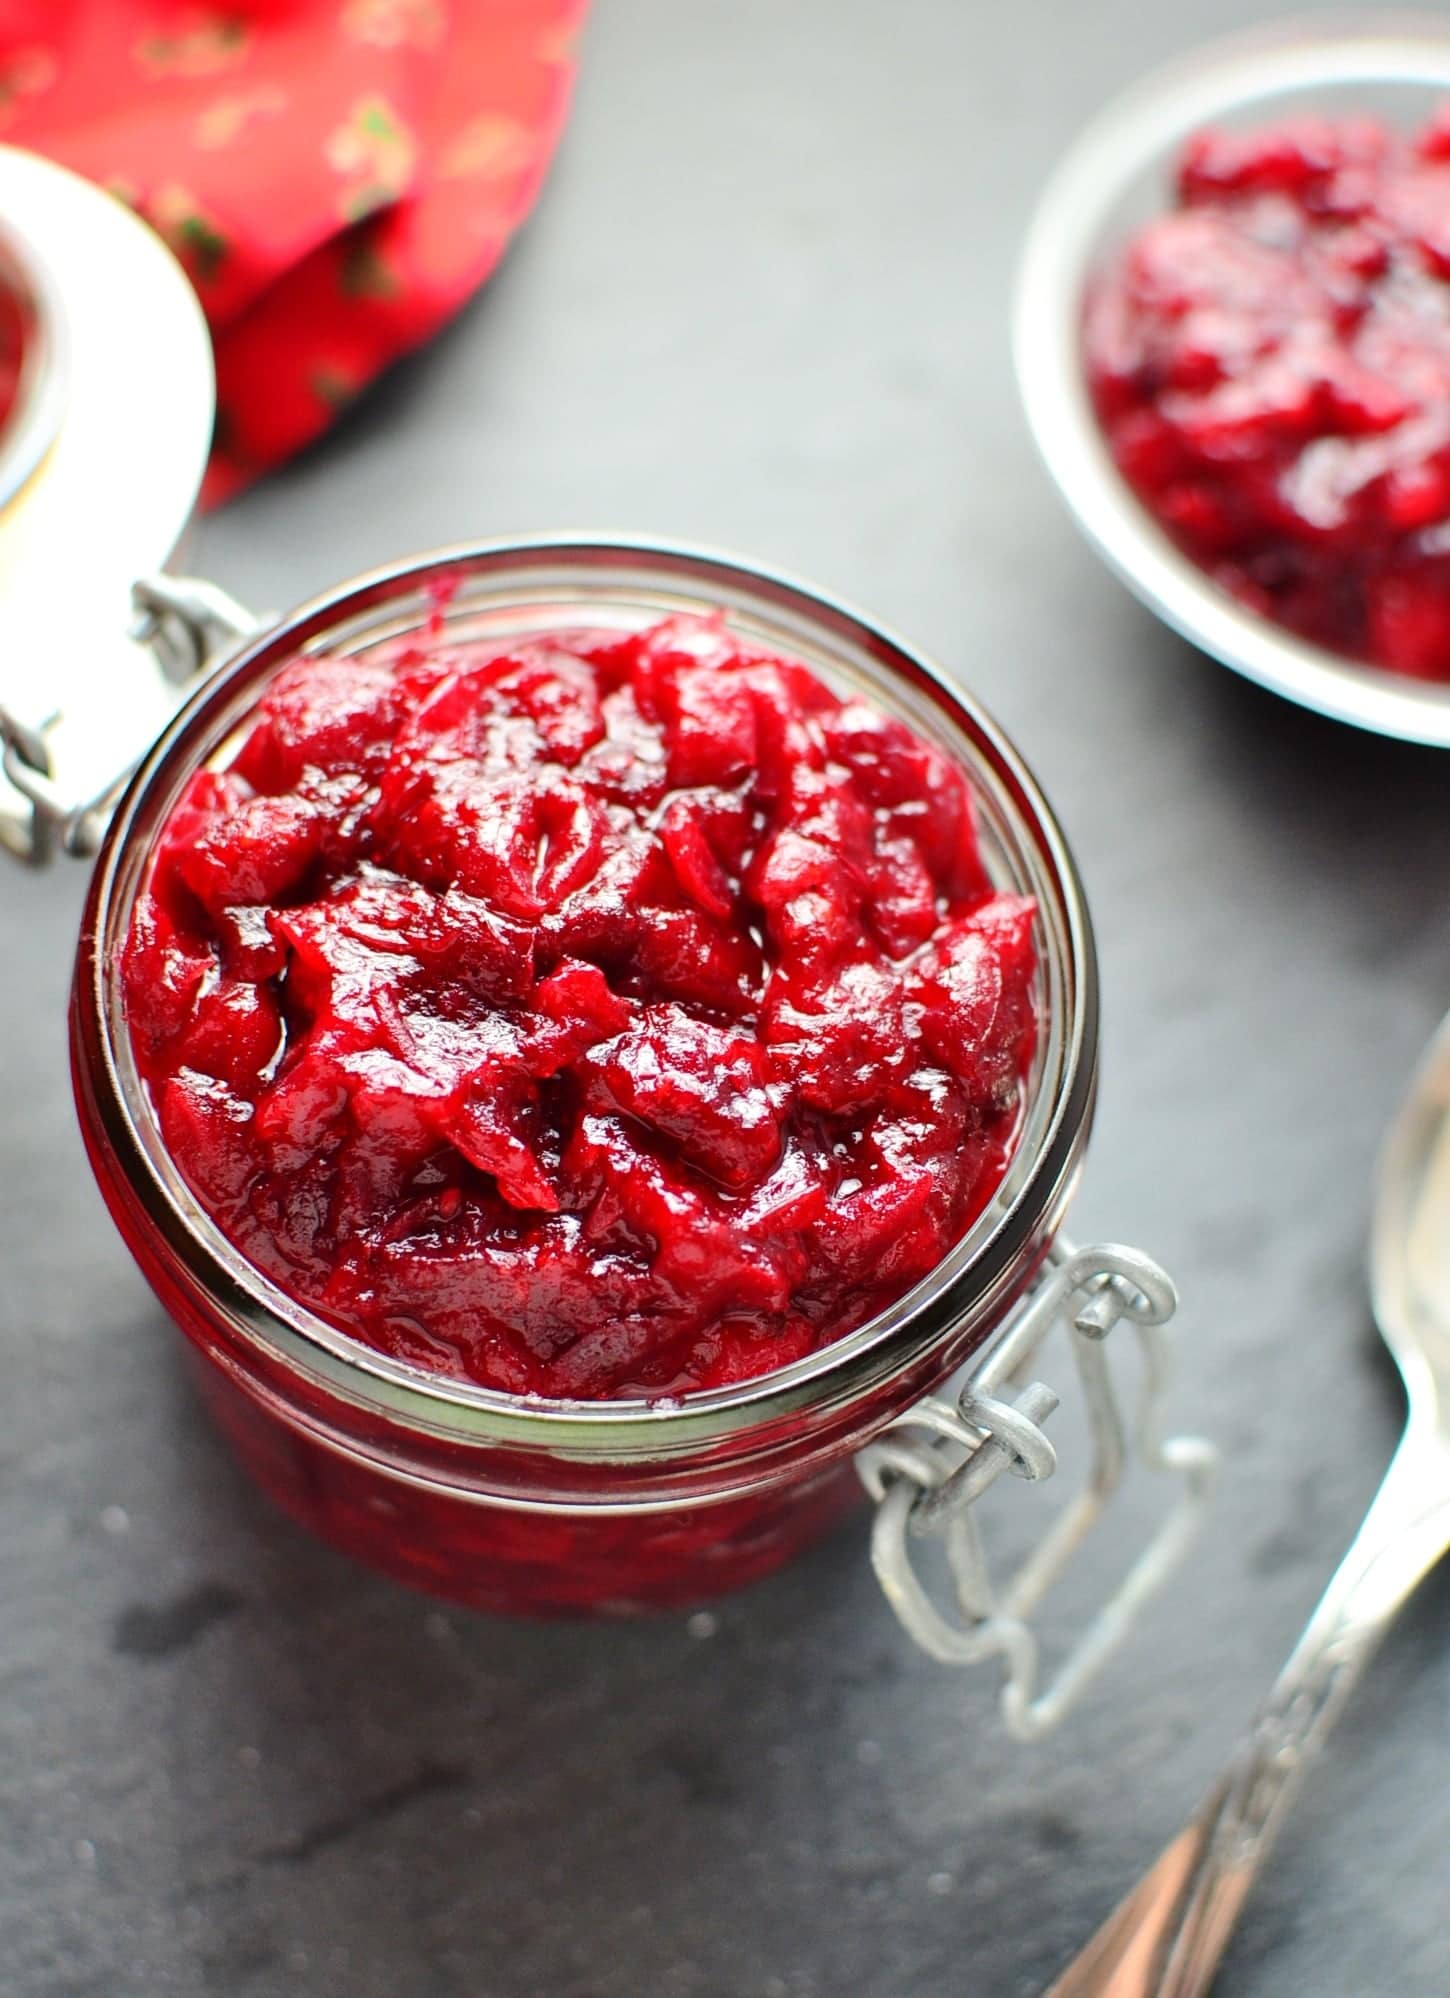 Top down view of cranberry sauce inside open jar with spoon in bottom right corner on top of grey surface.